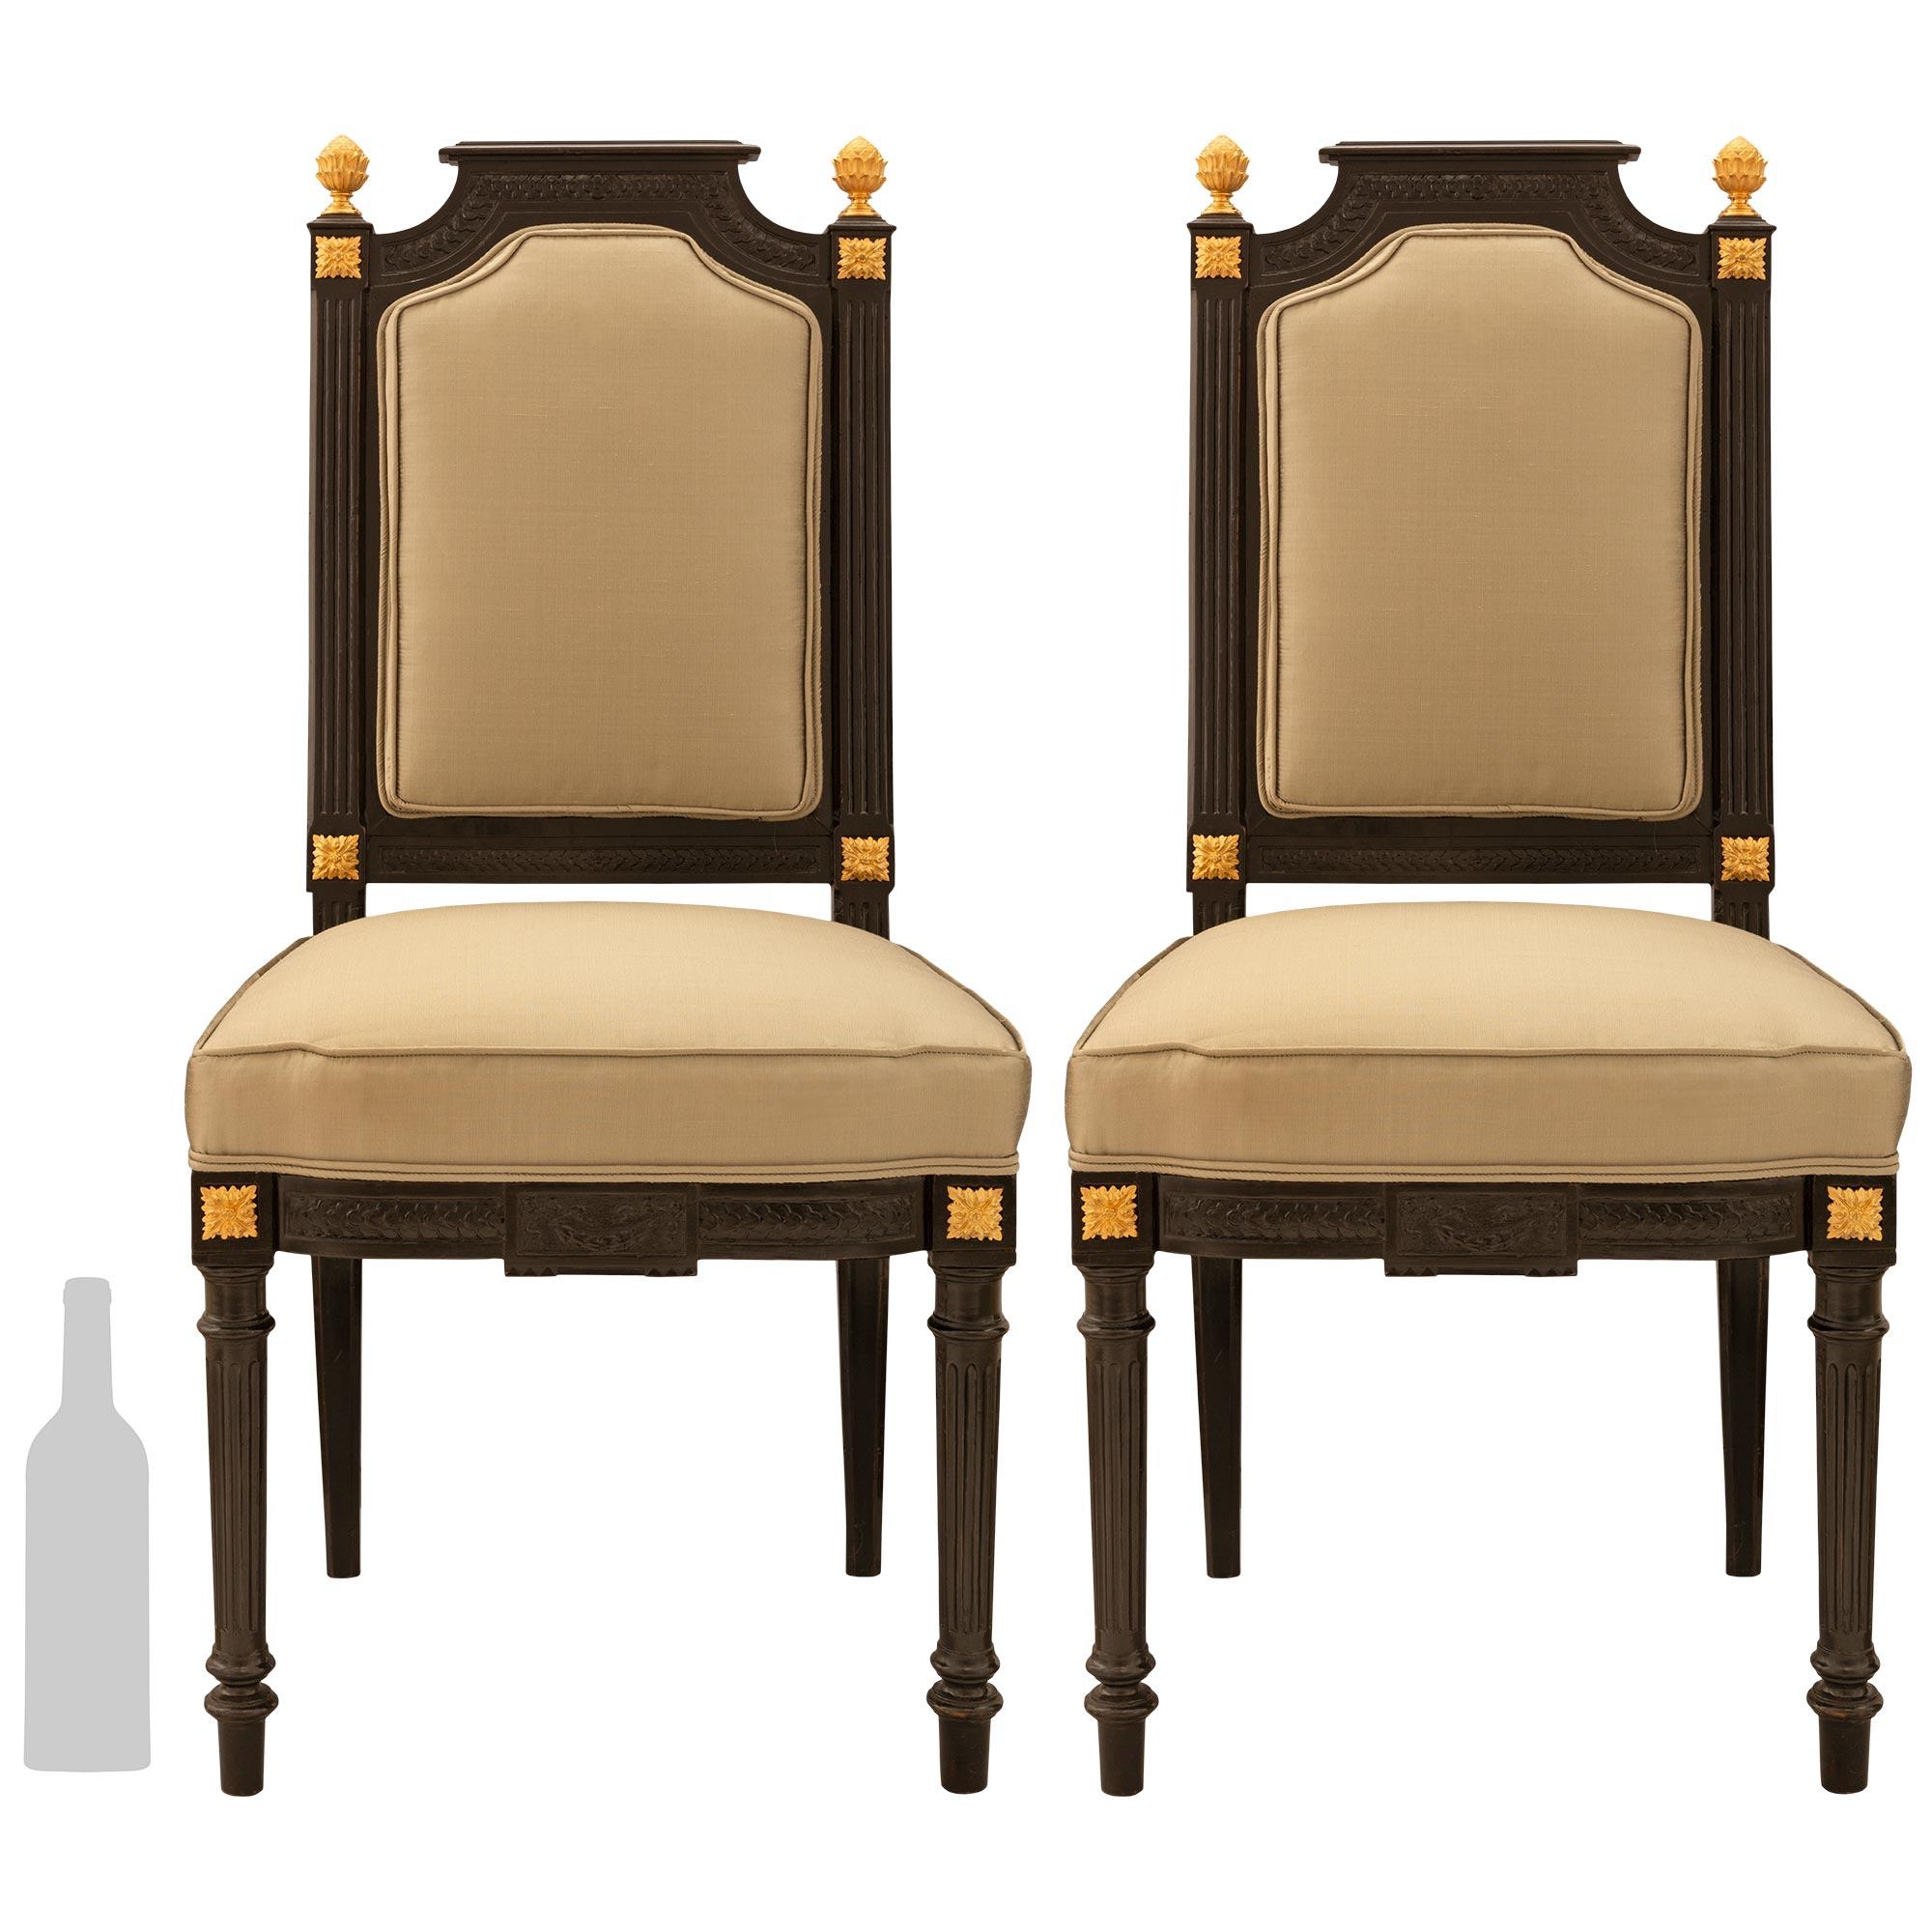 A striking and handsome pair of French 19th century Napoleon III period Louis XVI st. ebony and ormolu side chairs with unusually wide seats. Each chair is raised on four circular tapered fluted legs below richly chased ormolu recessed block